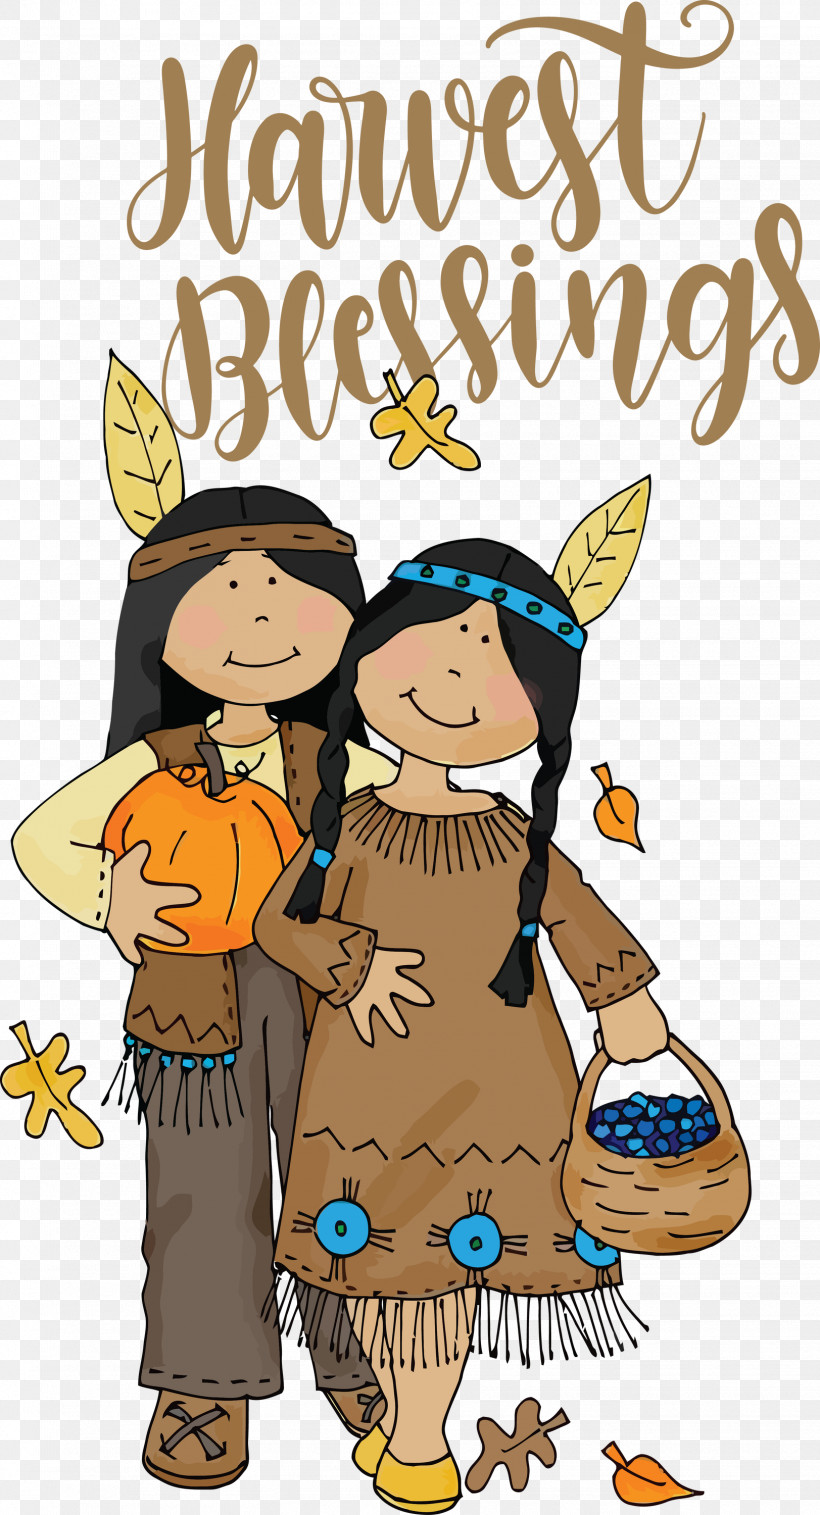 Harvest Blessings Thanksgiving Autumn, PNG, 1623x3000px, Harvest Blessings, American Cuisine, Autumn, Dinner, Holiday Download Free